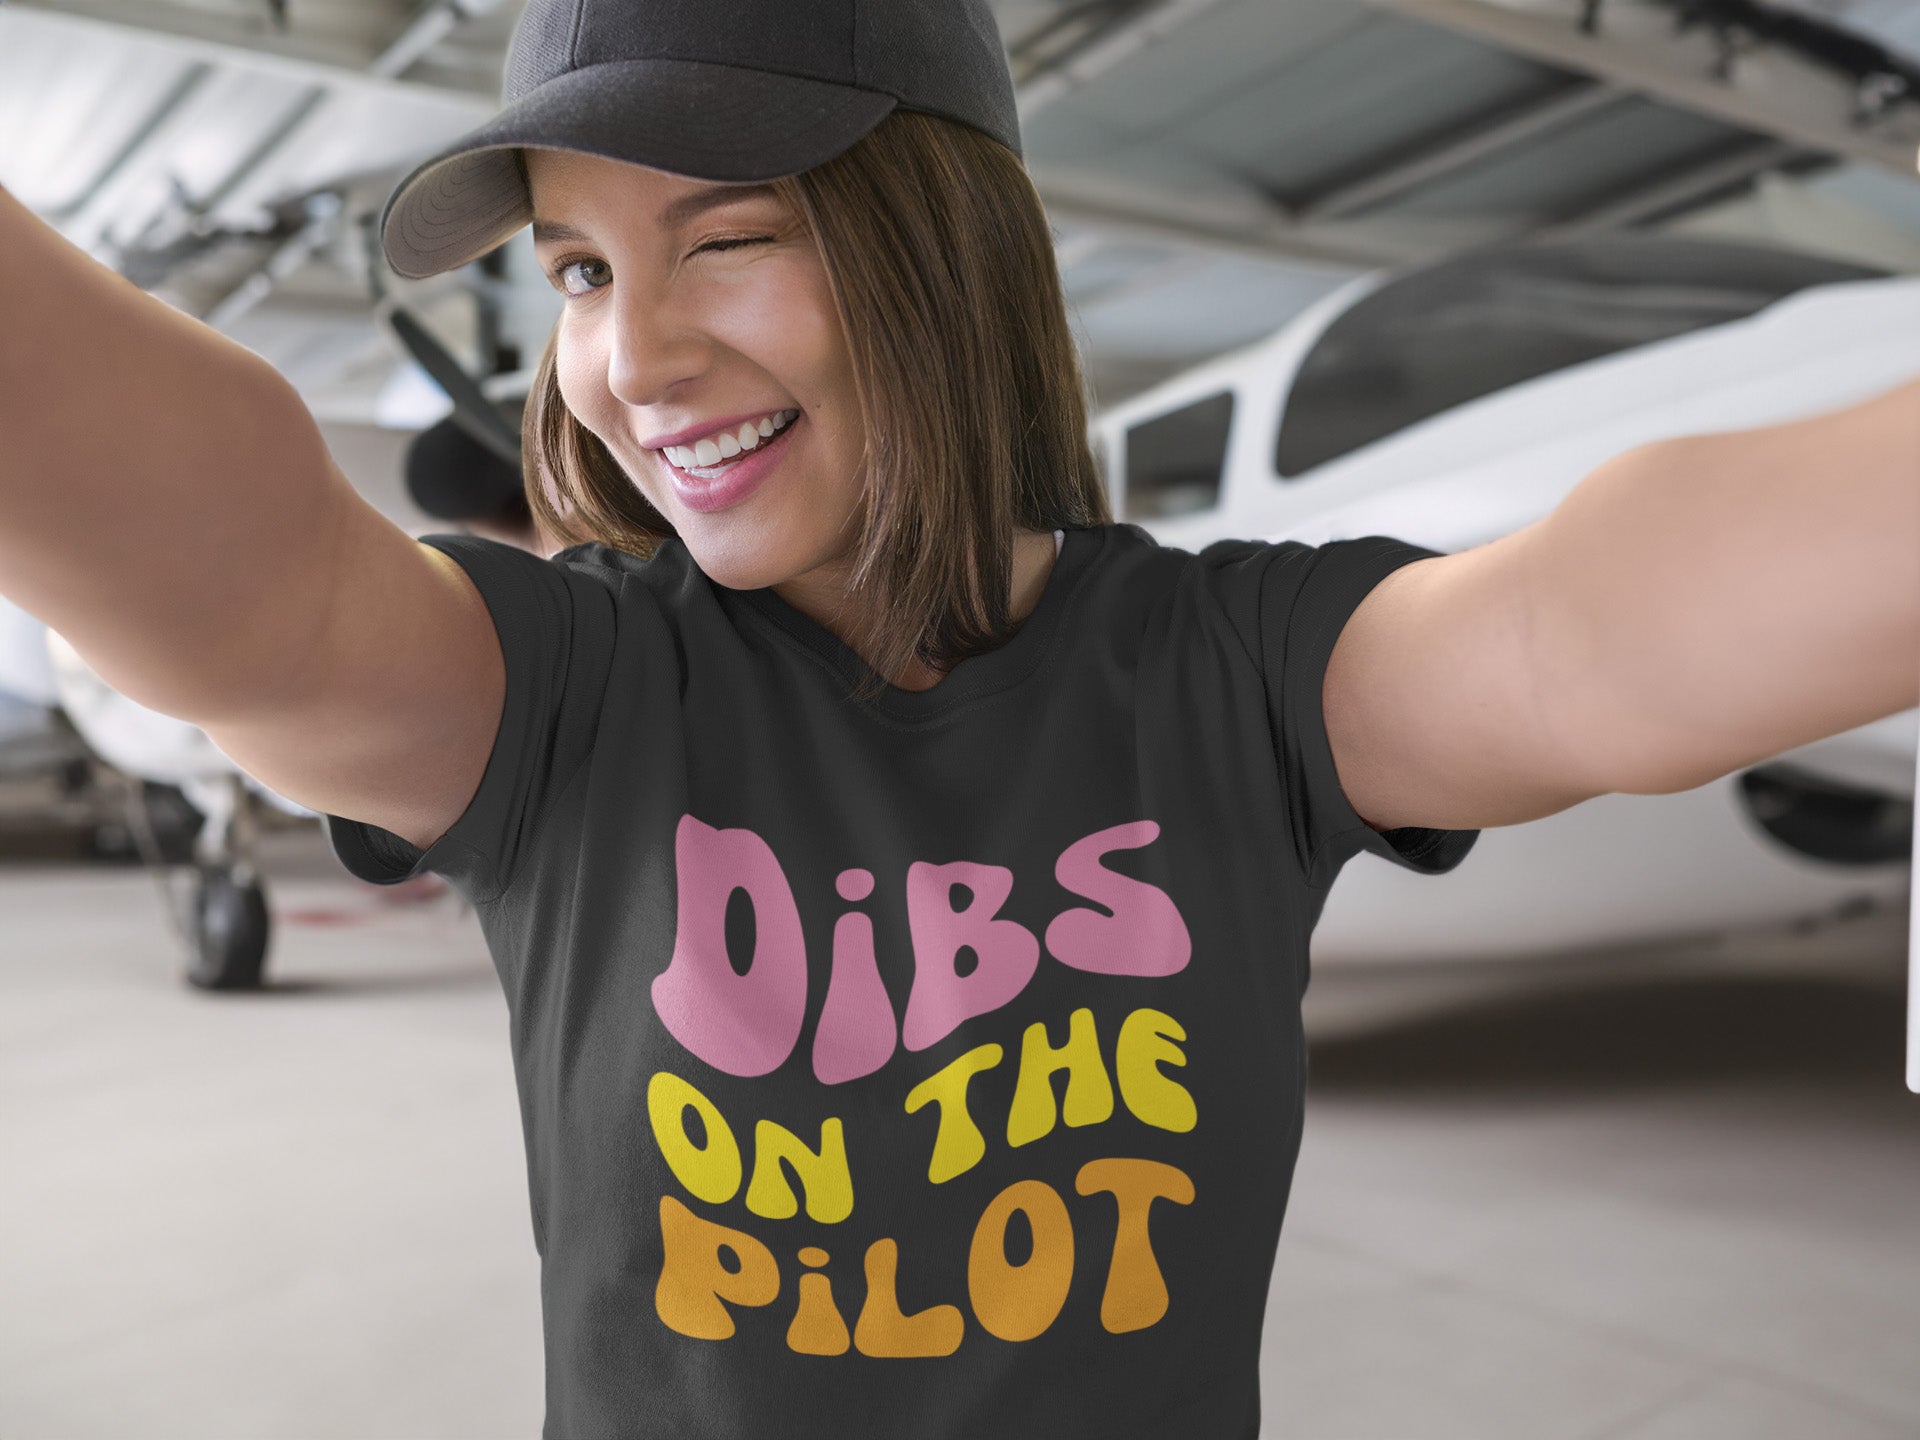 woman wearing a funny tshirt for pilot wives or girlfriends that says "dibs on the pilot"